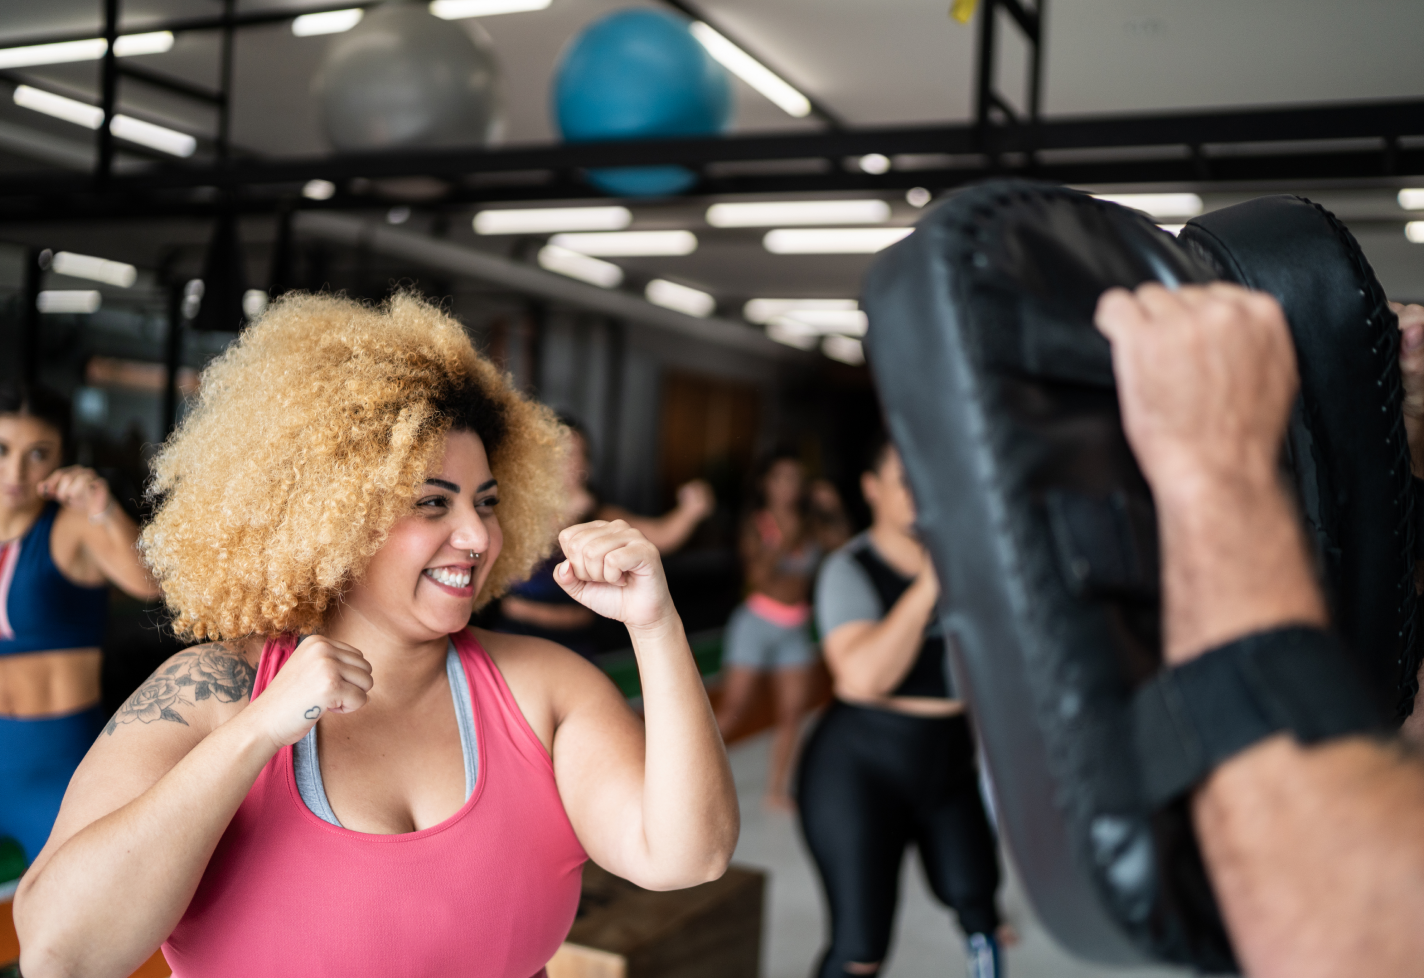 Smiling woman in boxing workout class.